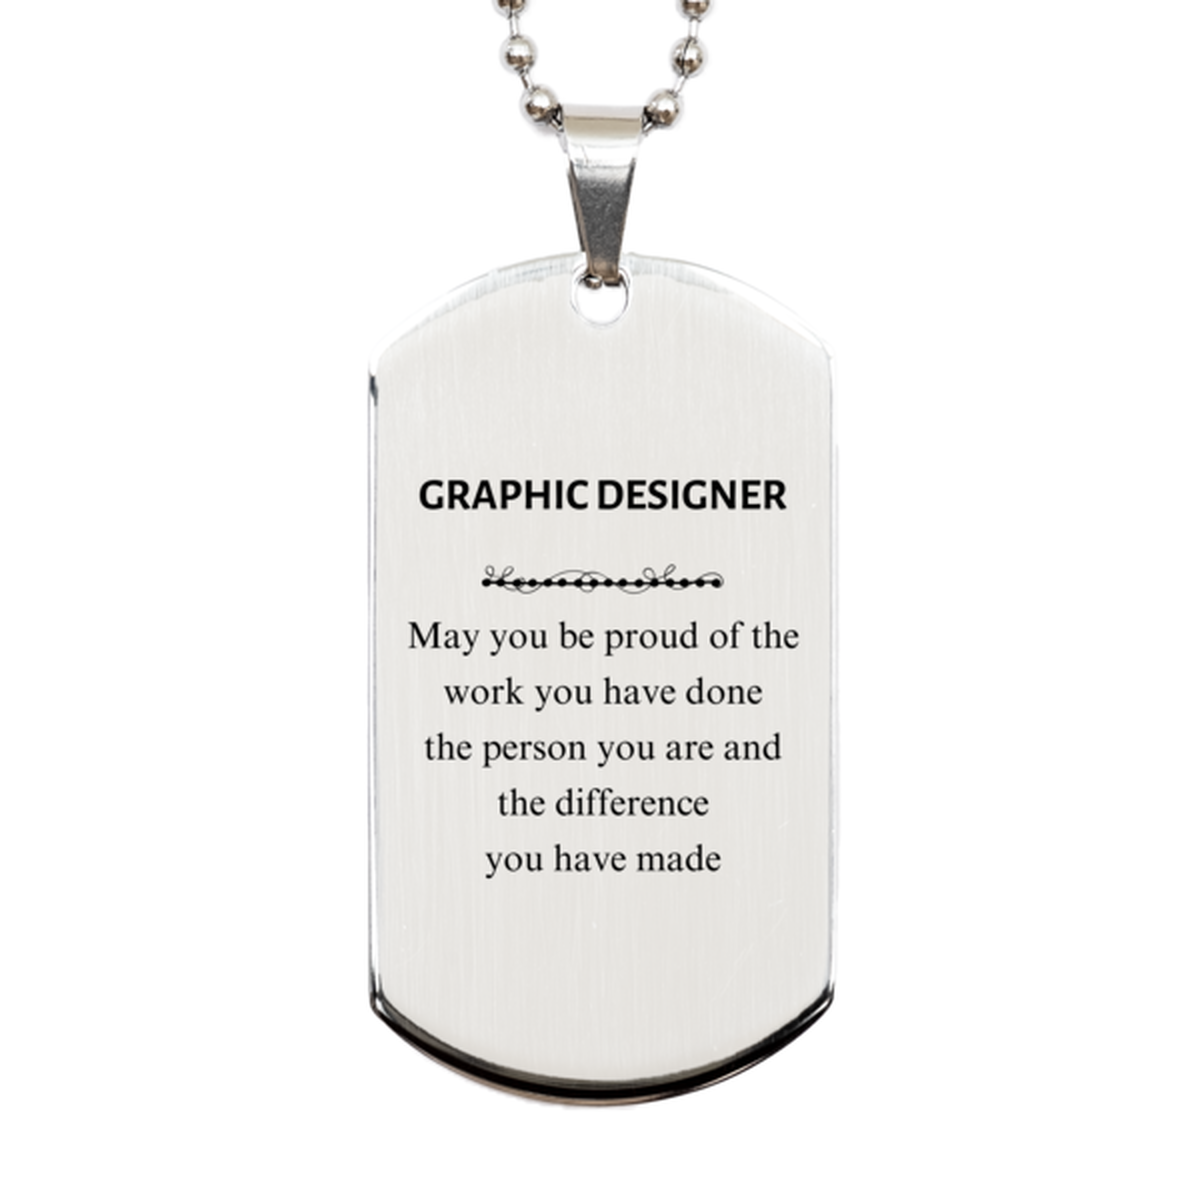 Graphic Designer May you be proud of the work you have done, Retirement Graphic Designer Silver Dog Tag for Colleague Appreciation Gifts Amazing for Graphic Designer